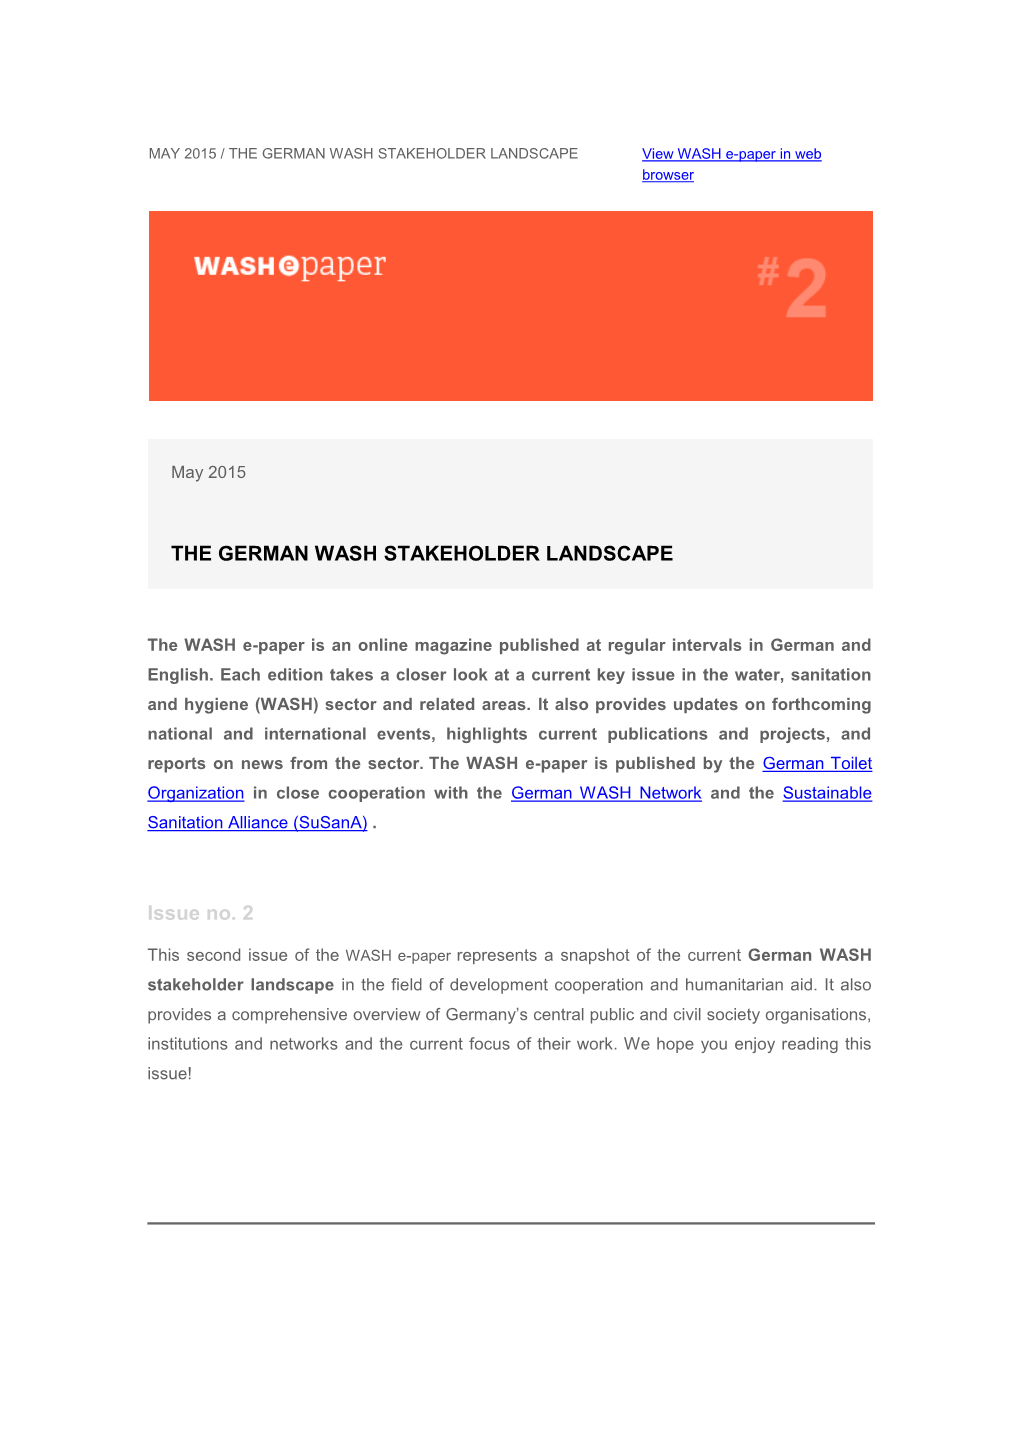 THE GERMAN WASH STAKEHOLDER LANDSCAPE View WASH E-Paper in Web Browser